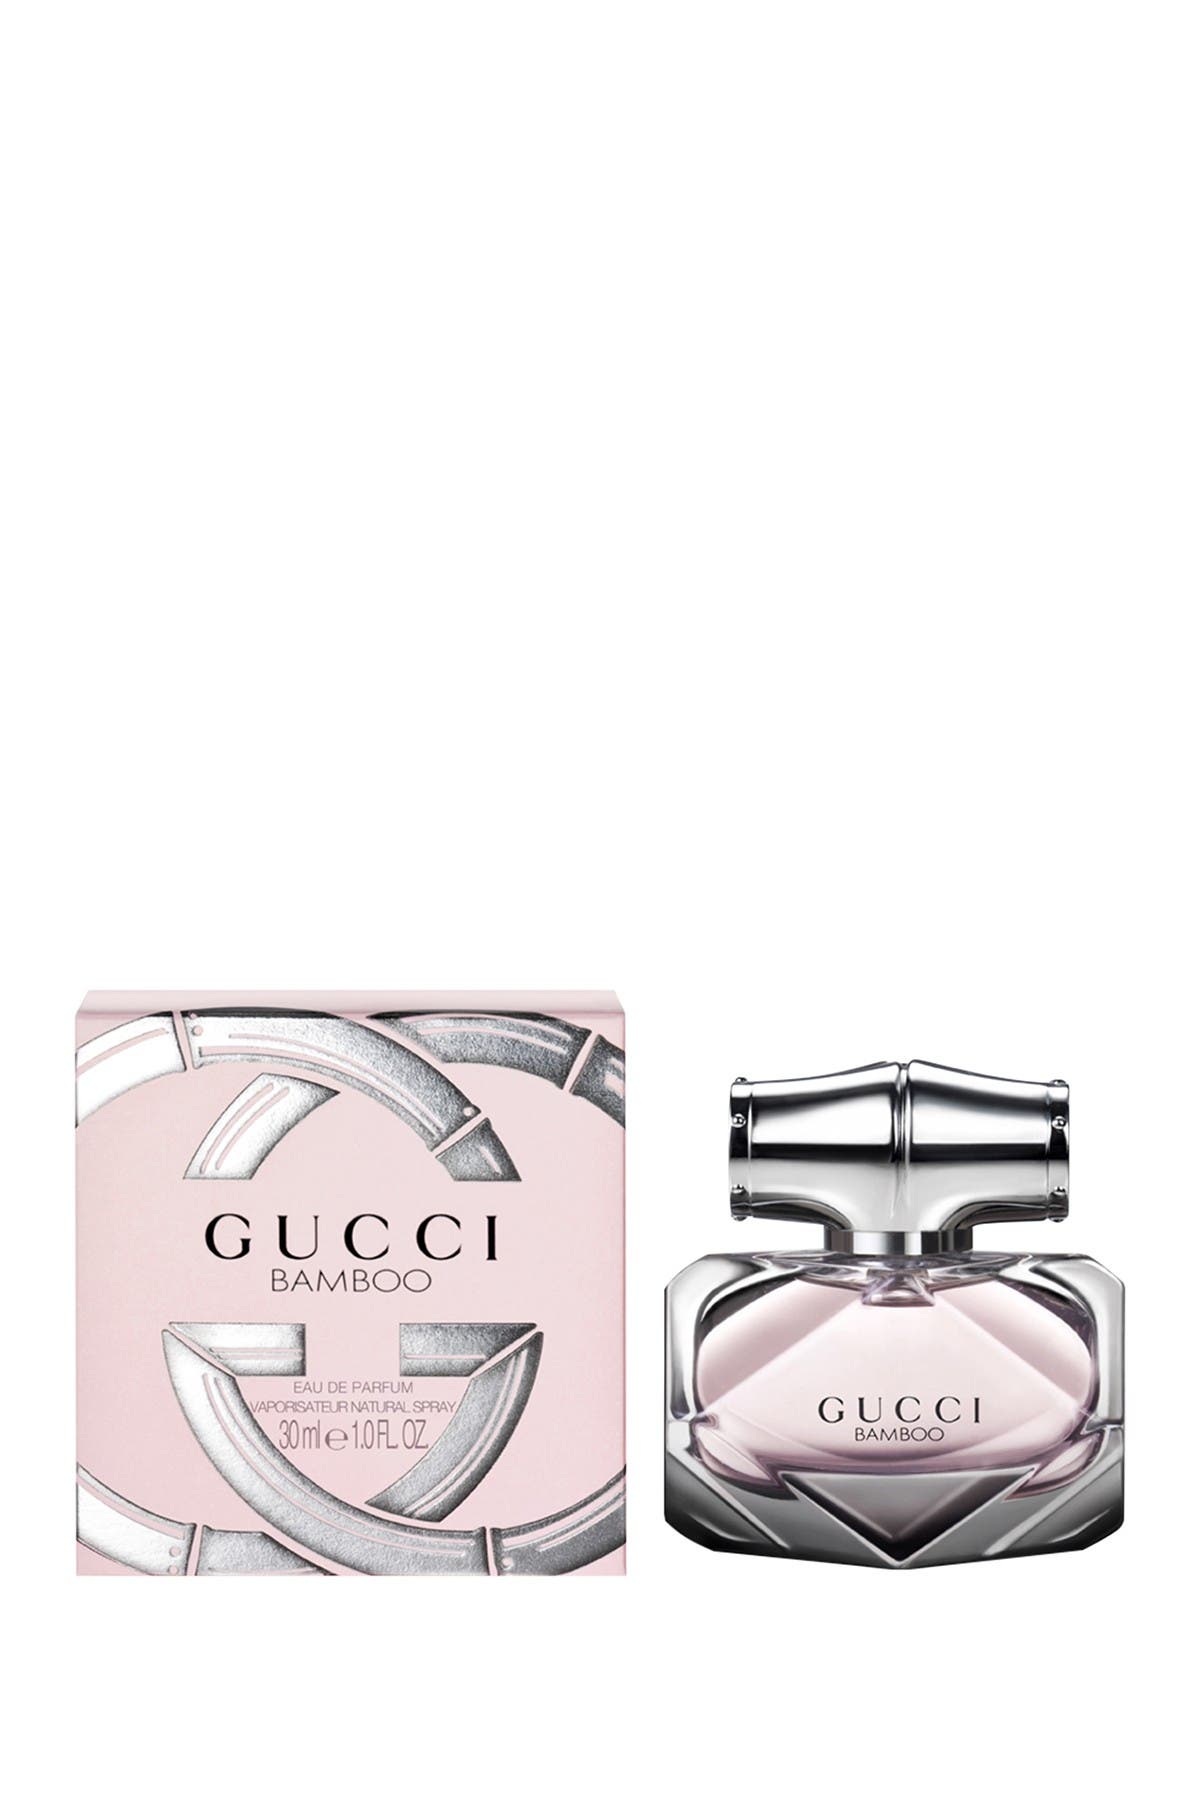 gucci bamboo nordstrom